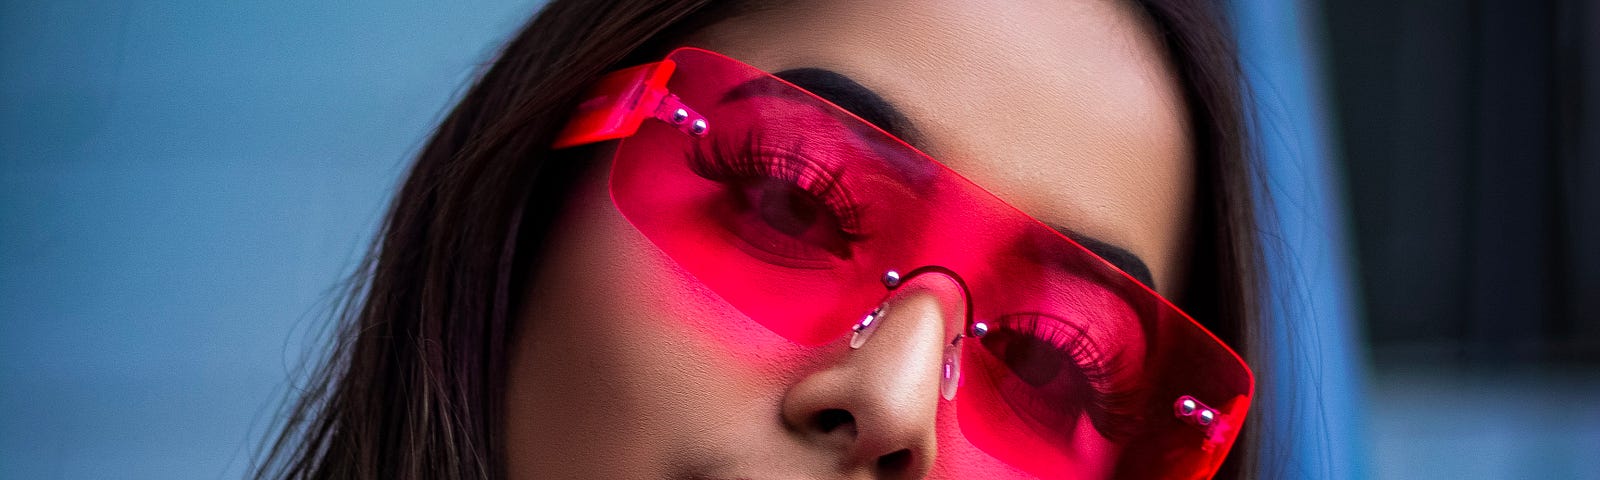 A young lady wearing glasses with neon pink-tinted lenses.